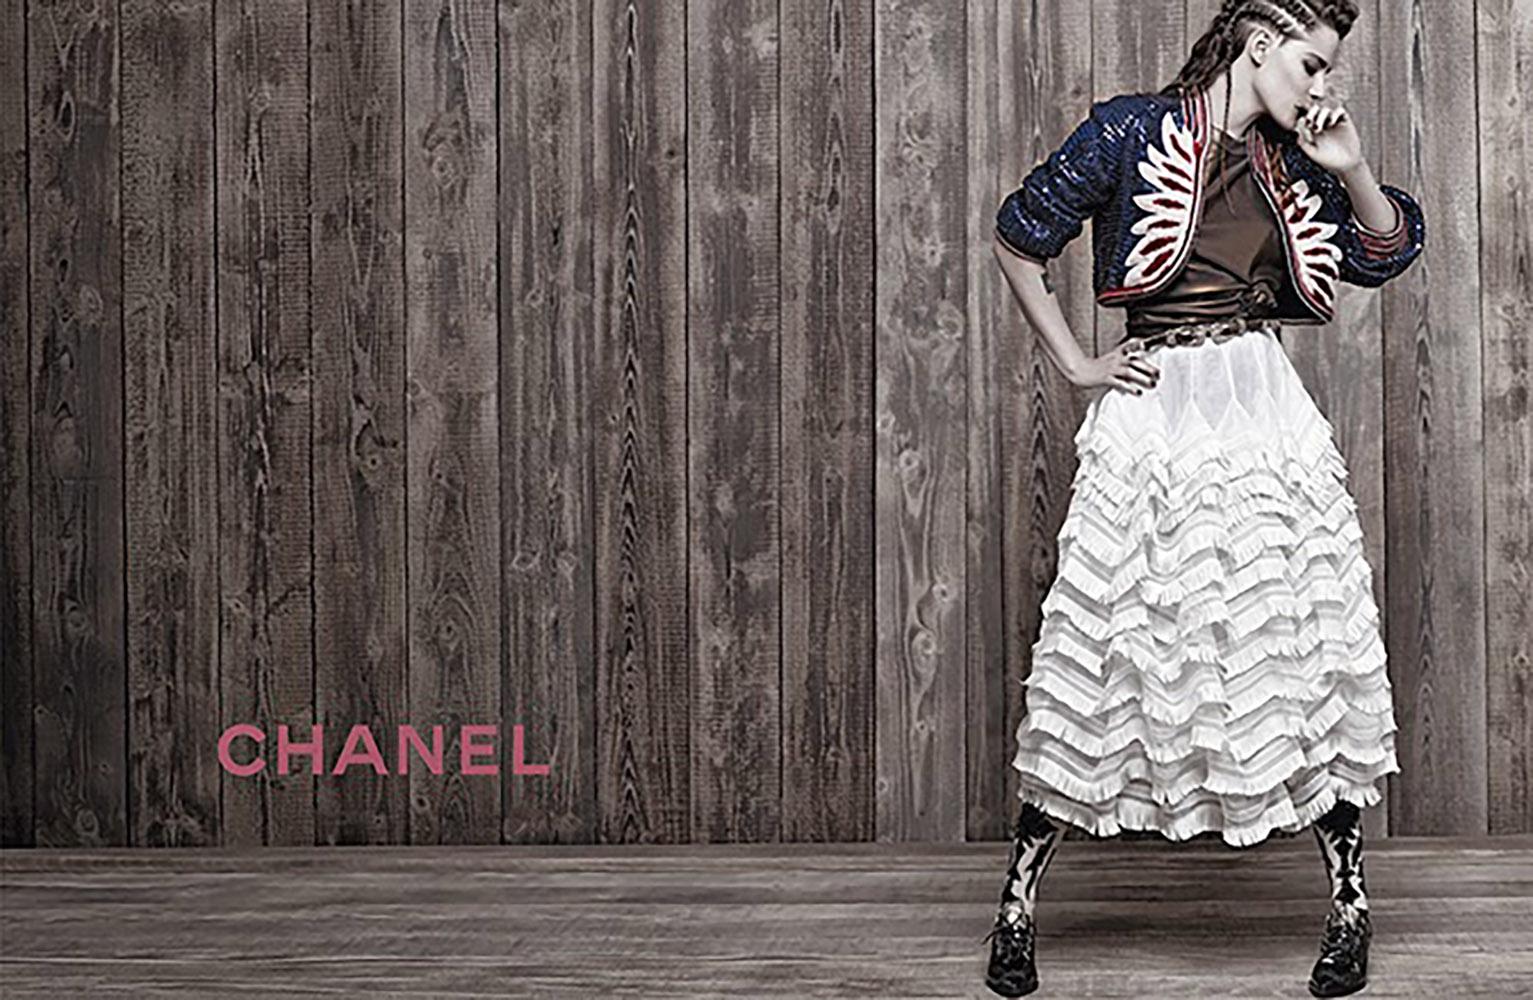 Rare, collectors Chanel jacket from Ad Campaign of fabulous Paris / DALLAS Collection by Karl Lagerfeld. As seen on Kristen Stewart in Chanel Adverts around the word. 
Size mark 38 FR. kept unworn.
- hand-embellished with multilayers of littlest